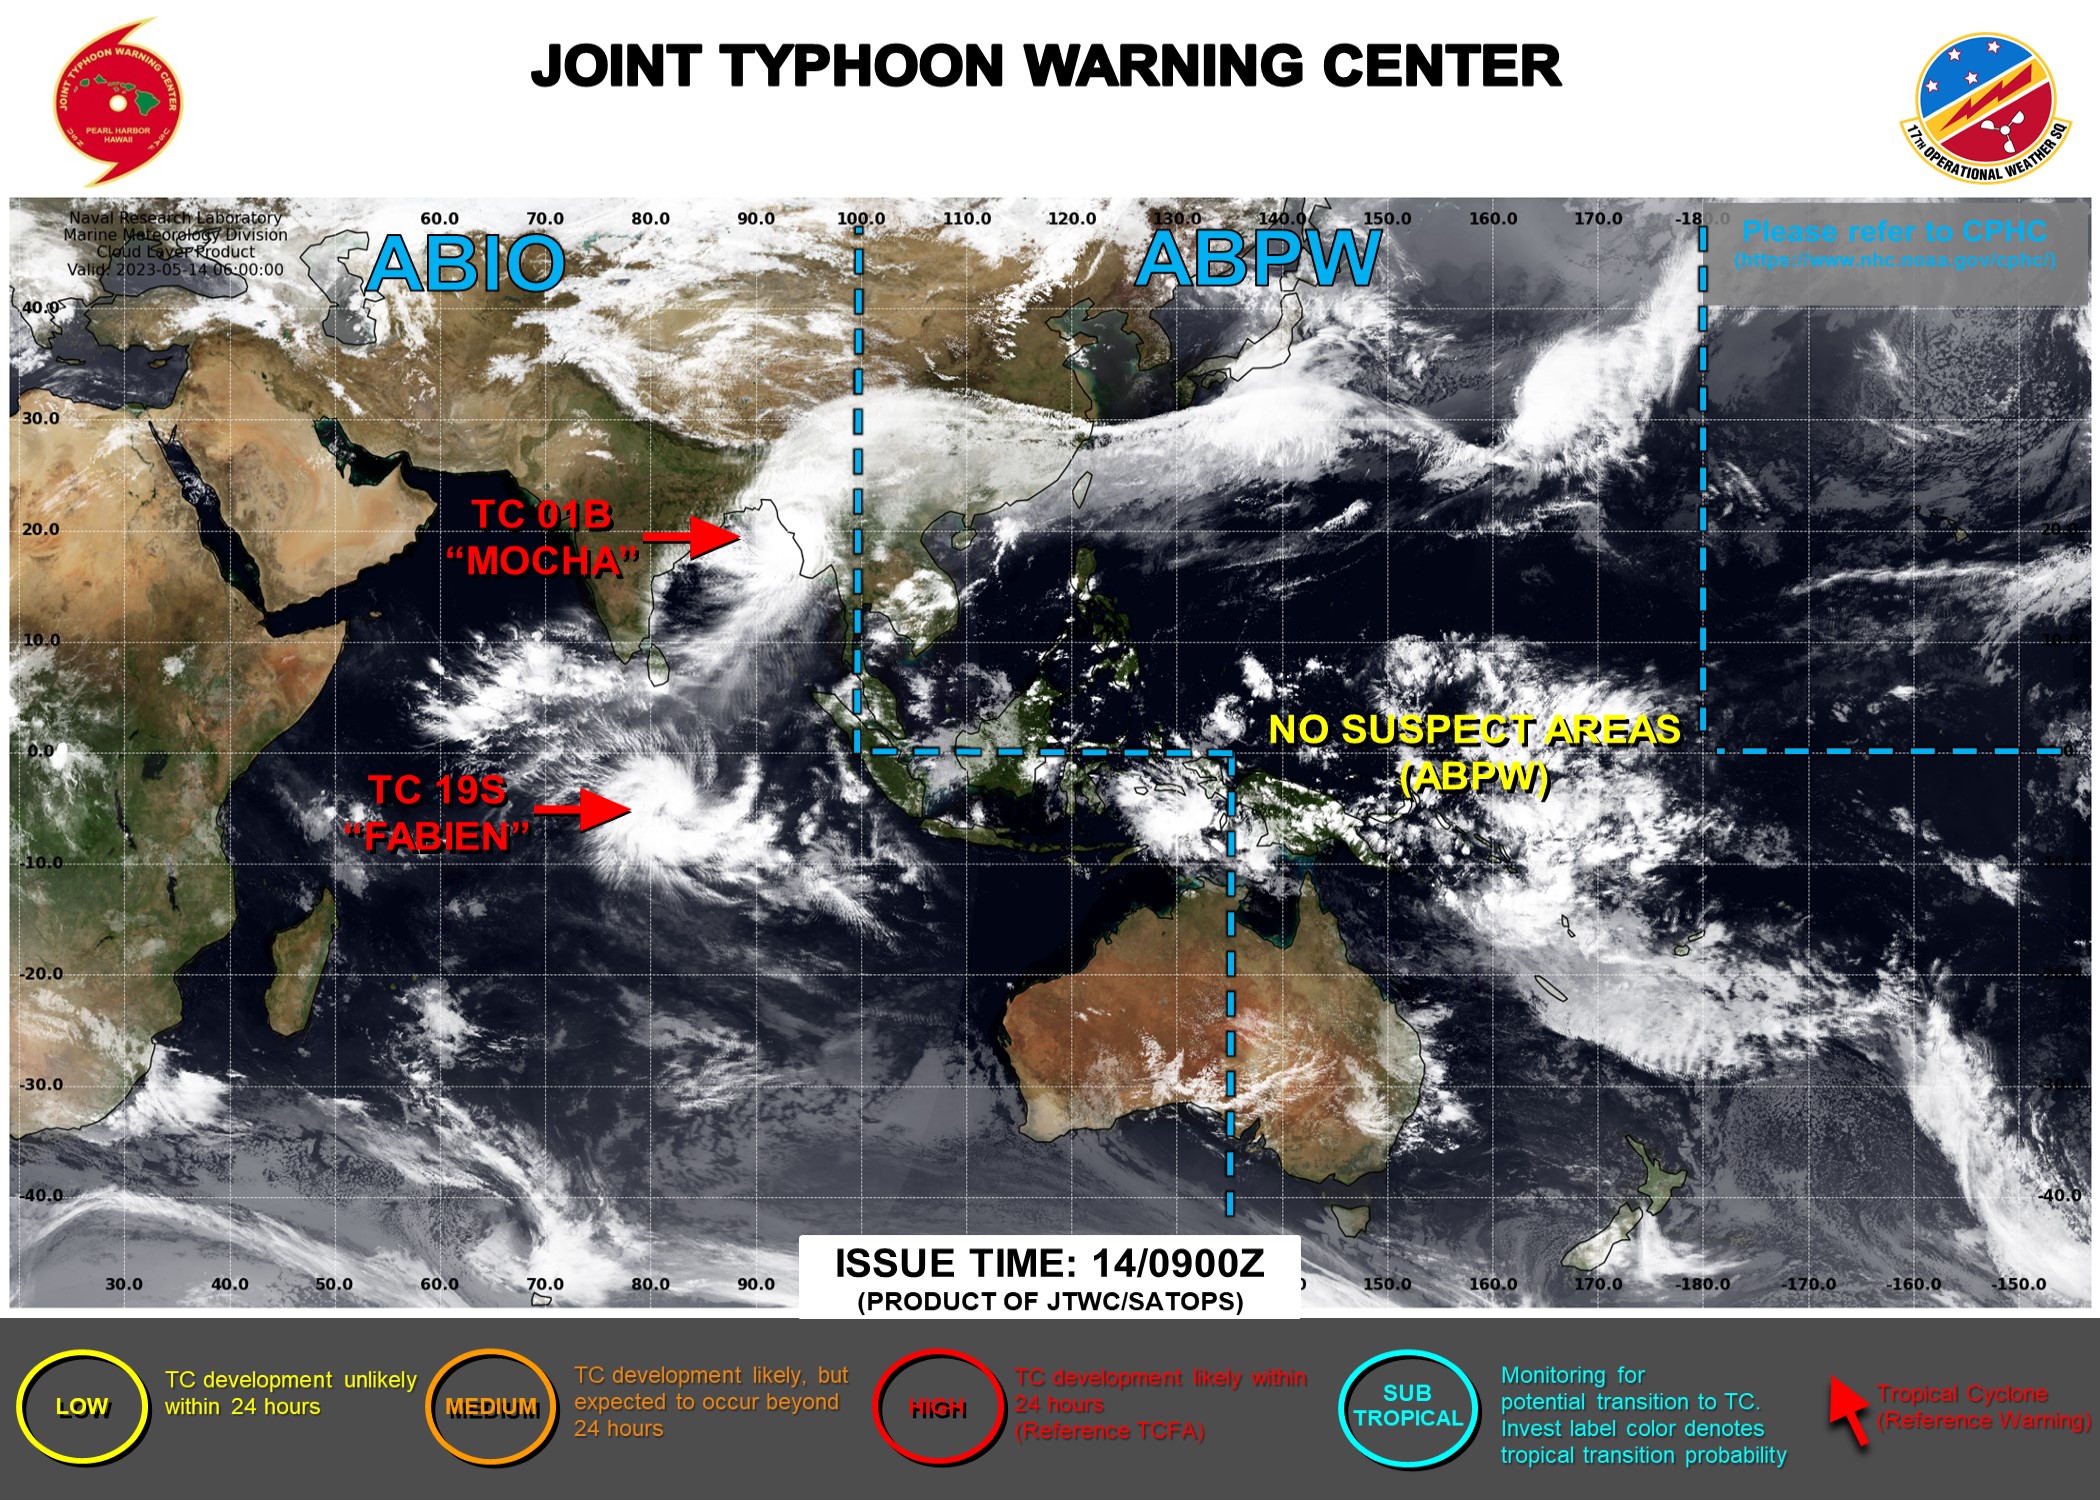 JTWC IS ISSUING 6HOURLY WARNINGS ON TC 01B(MOCHA) AND TC 19S(FABIEN). 3HOURLY SATELLITE BULLETINS ARE ISSUED ON BOTH CYCLONES.